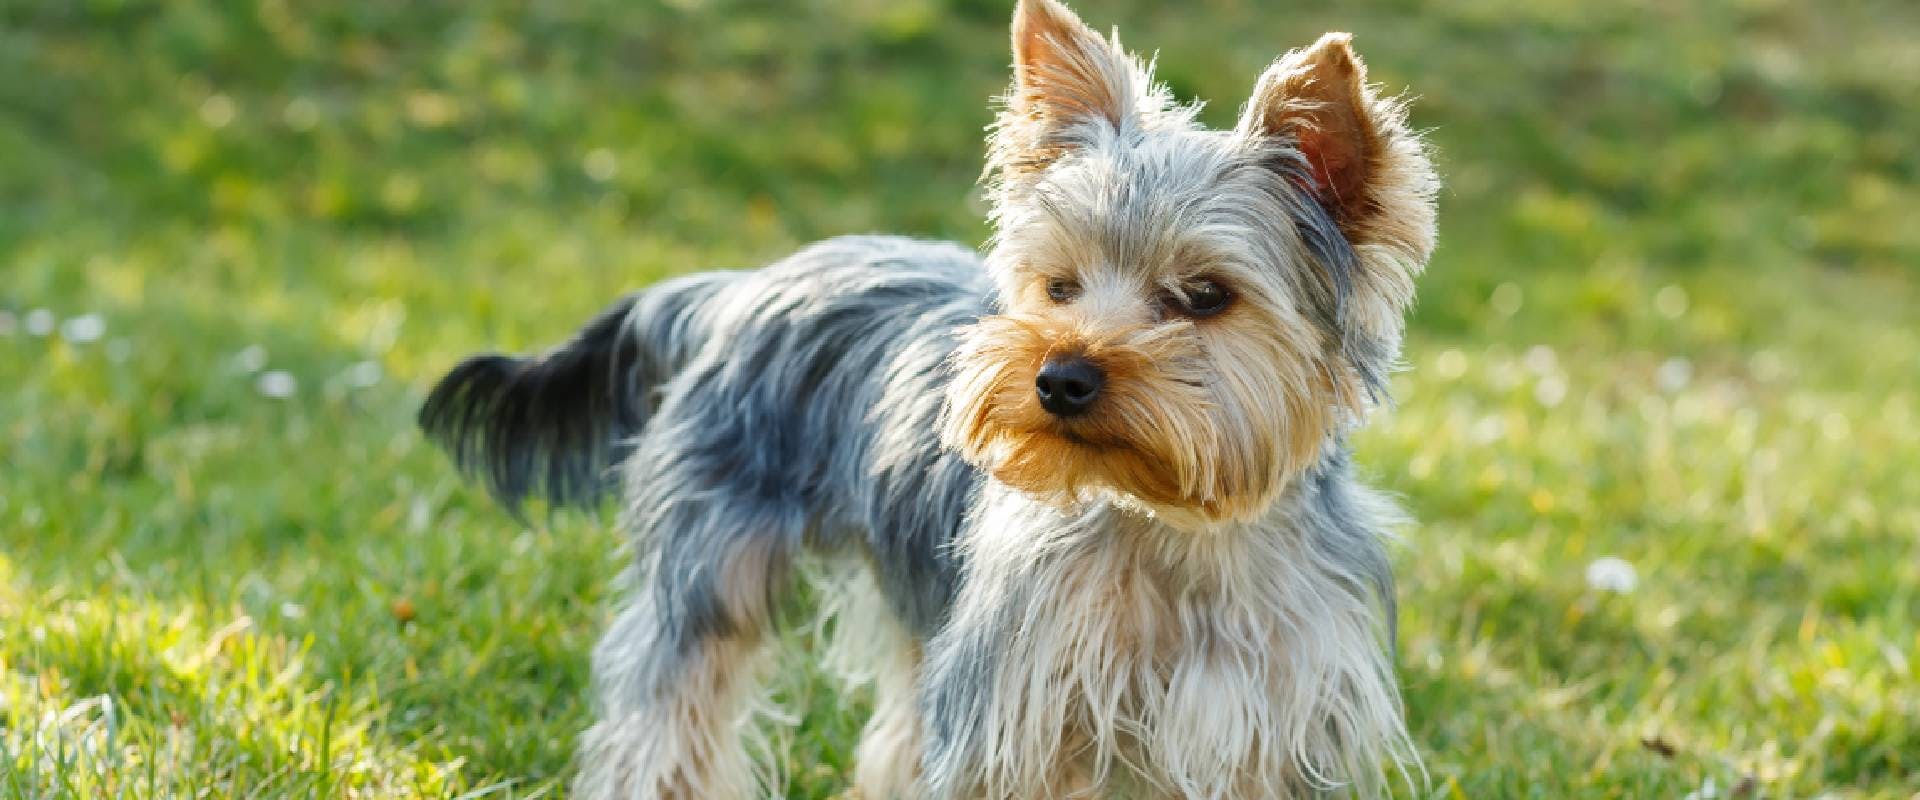 whats the difference between a yorkie and silky